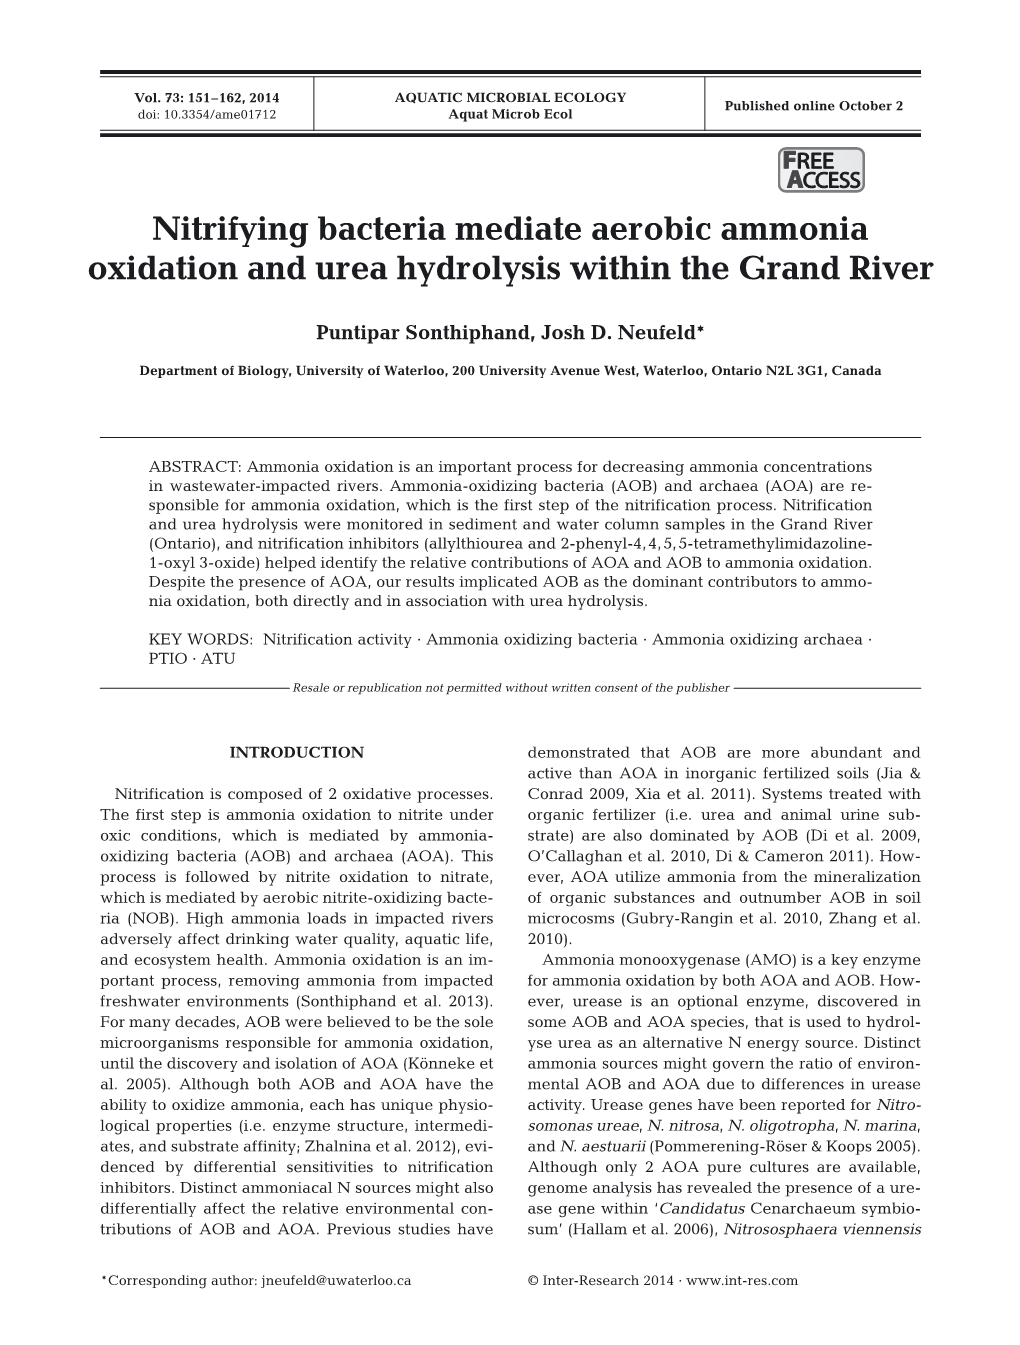 Nitrifying Bacteria Mediate Aerobic Ammonia Oxidation and Urea Hydrolysis Within the Grand River